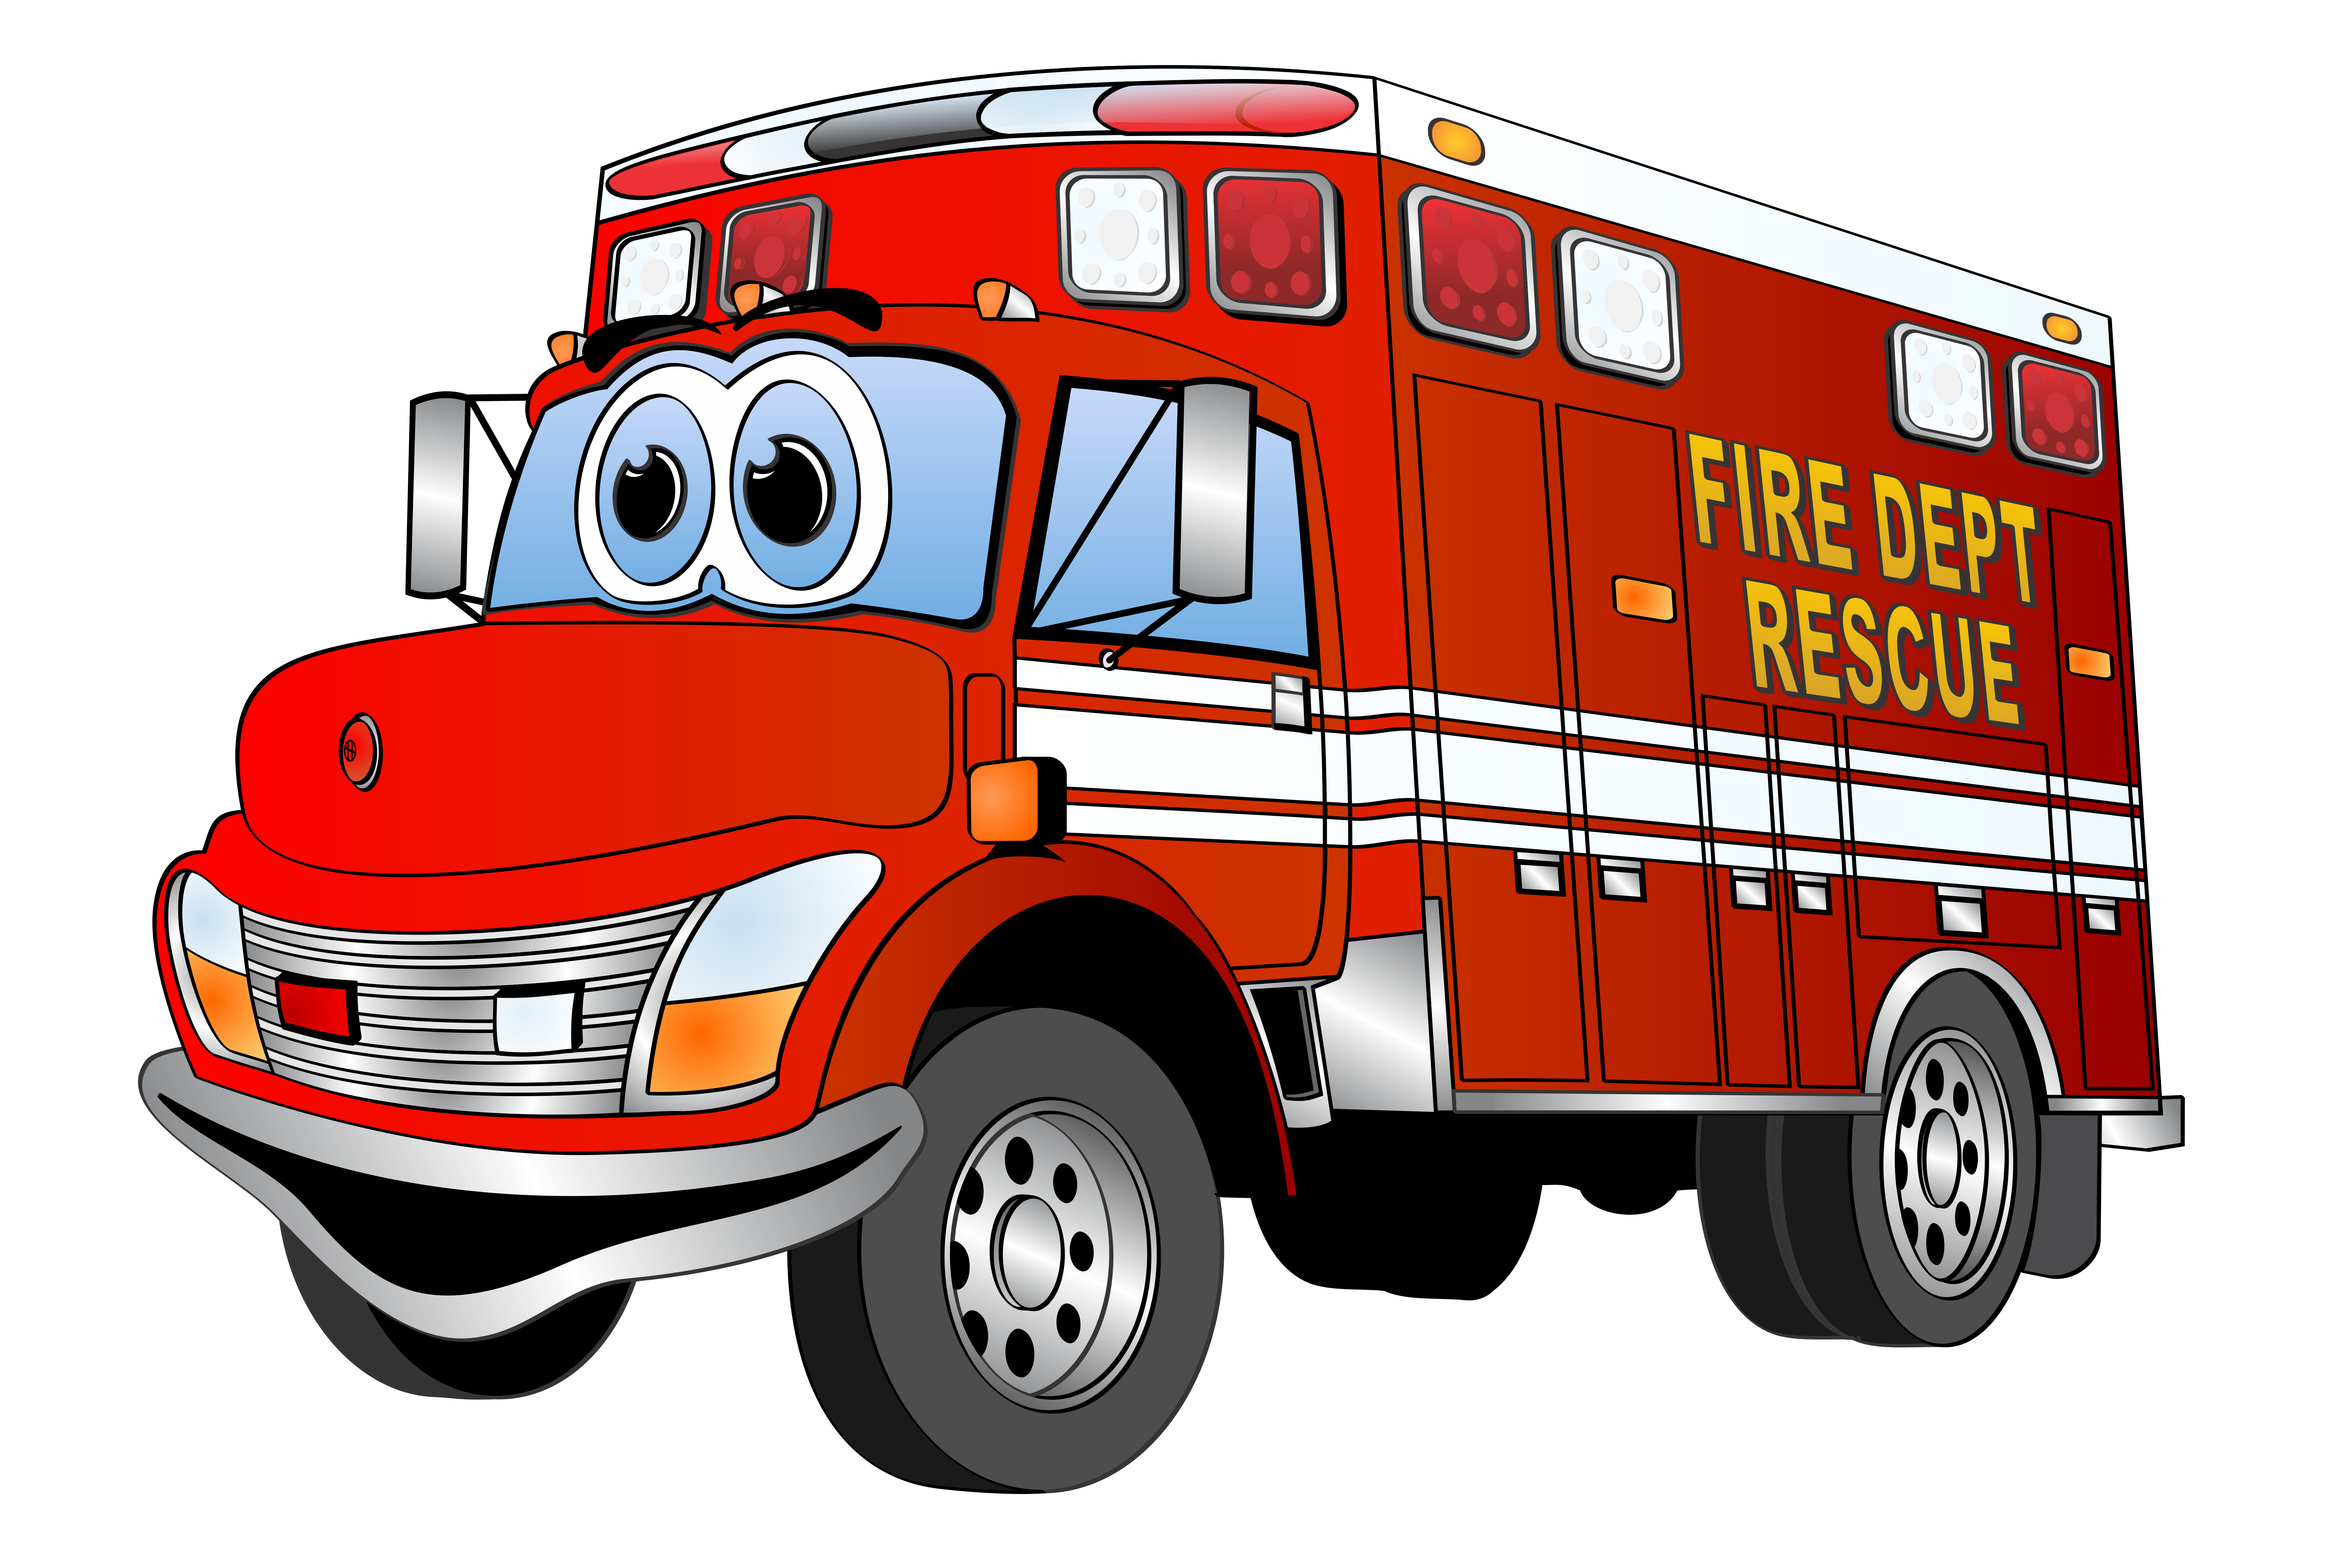 Picture Of Firetruck - ClipArt | Clipart Panda - Free Clipart Images